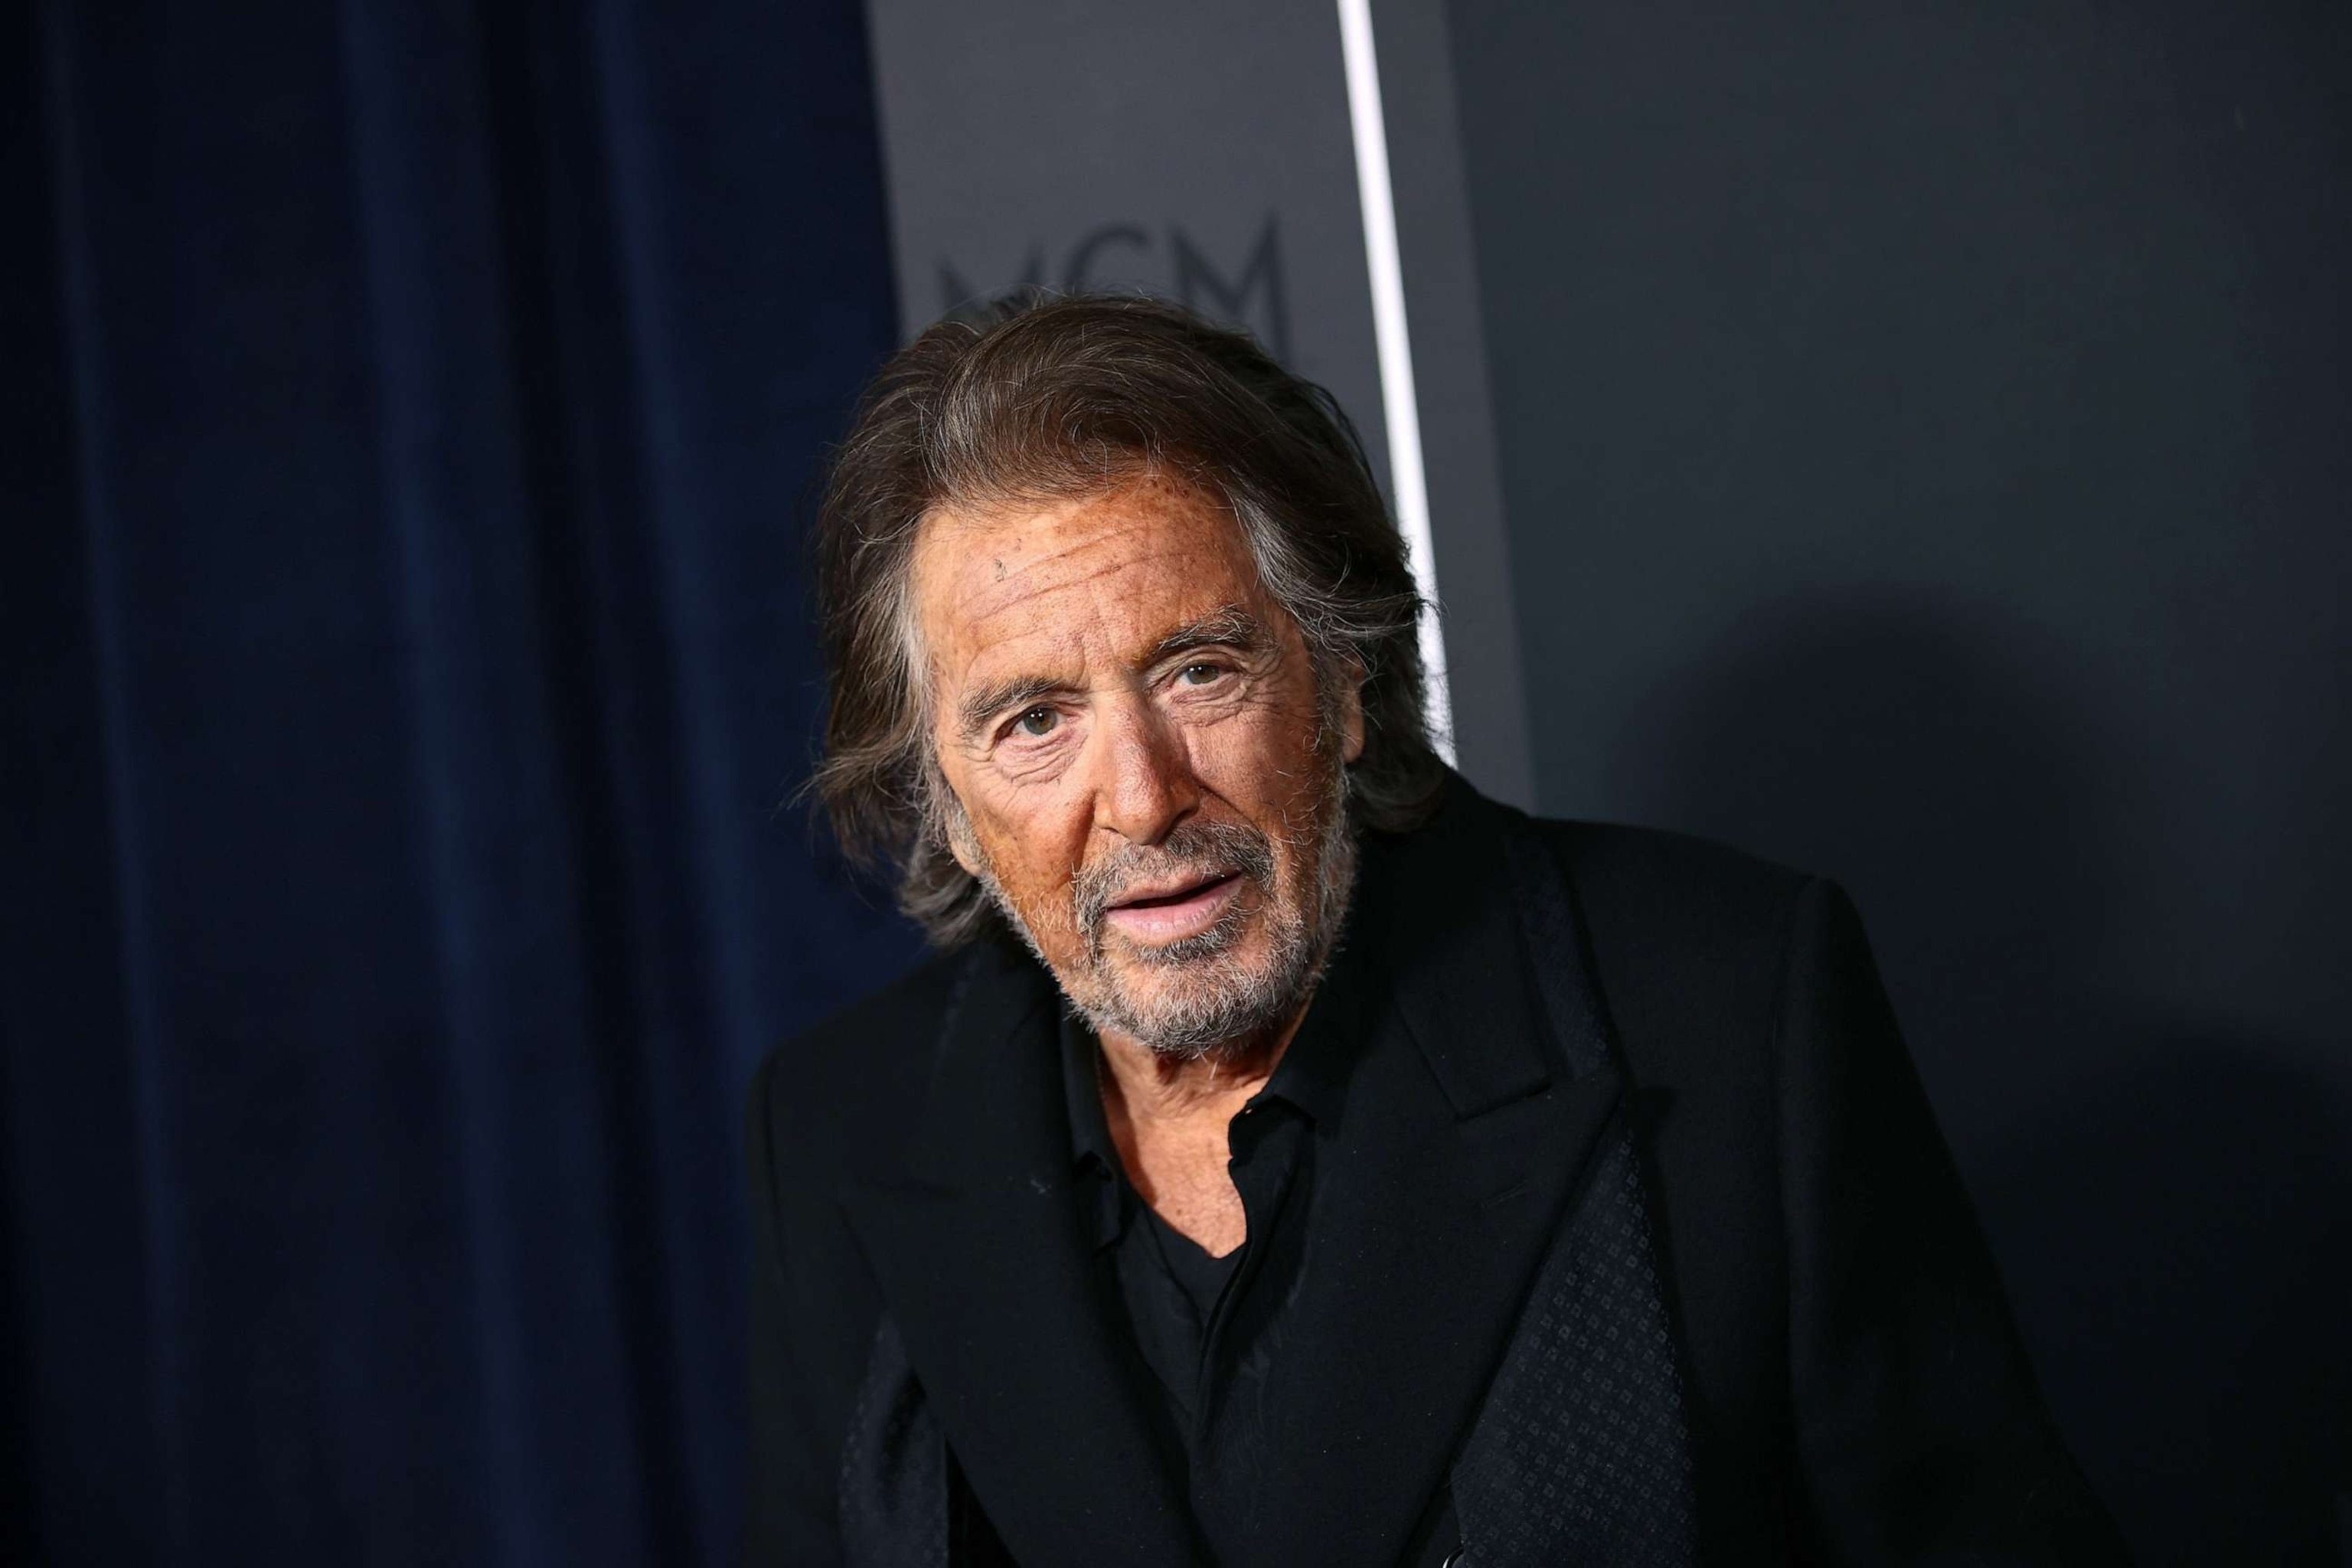 PHOTO: Al Pacino attends the "House Of Gucci" New York Premiere at Jazz at Lincoln Center, Nov. 16, 2021, in New York.